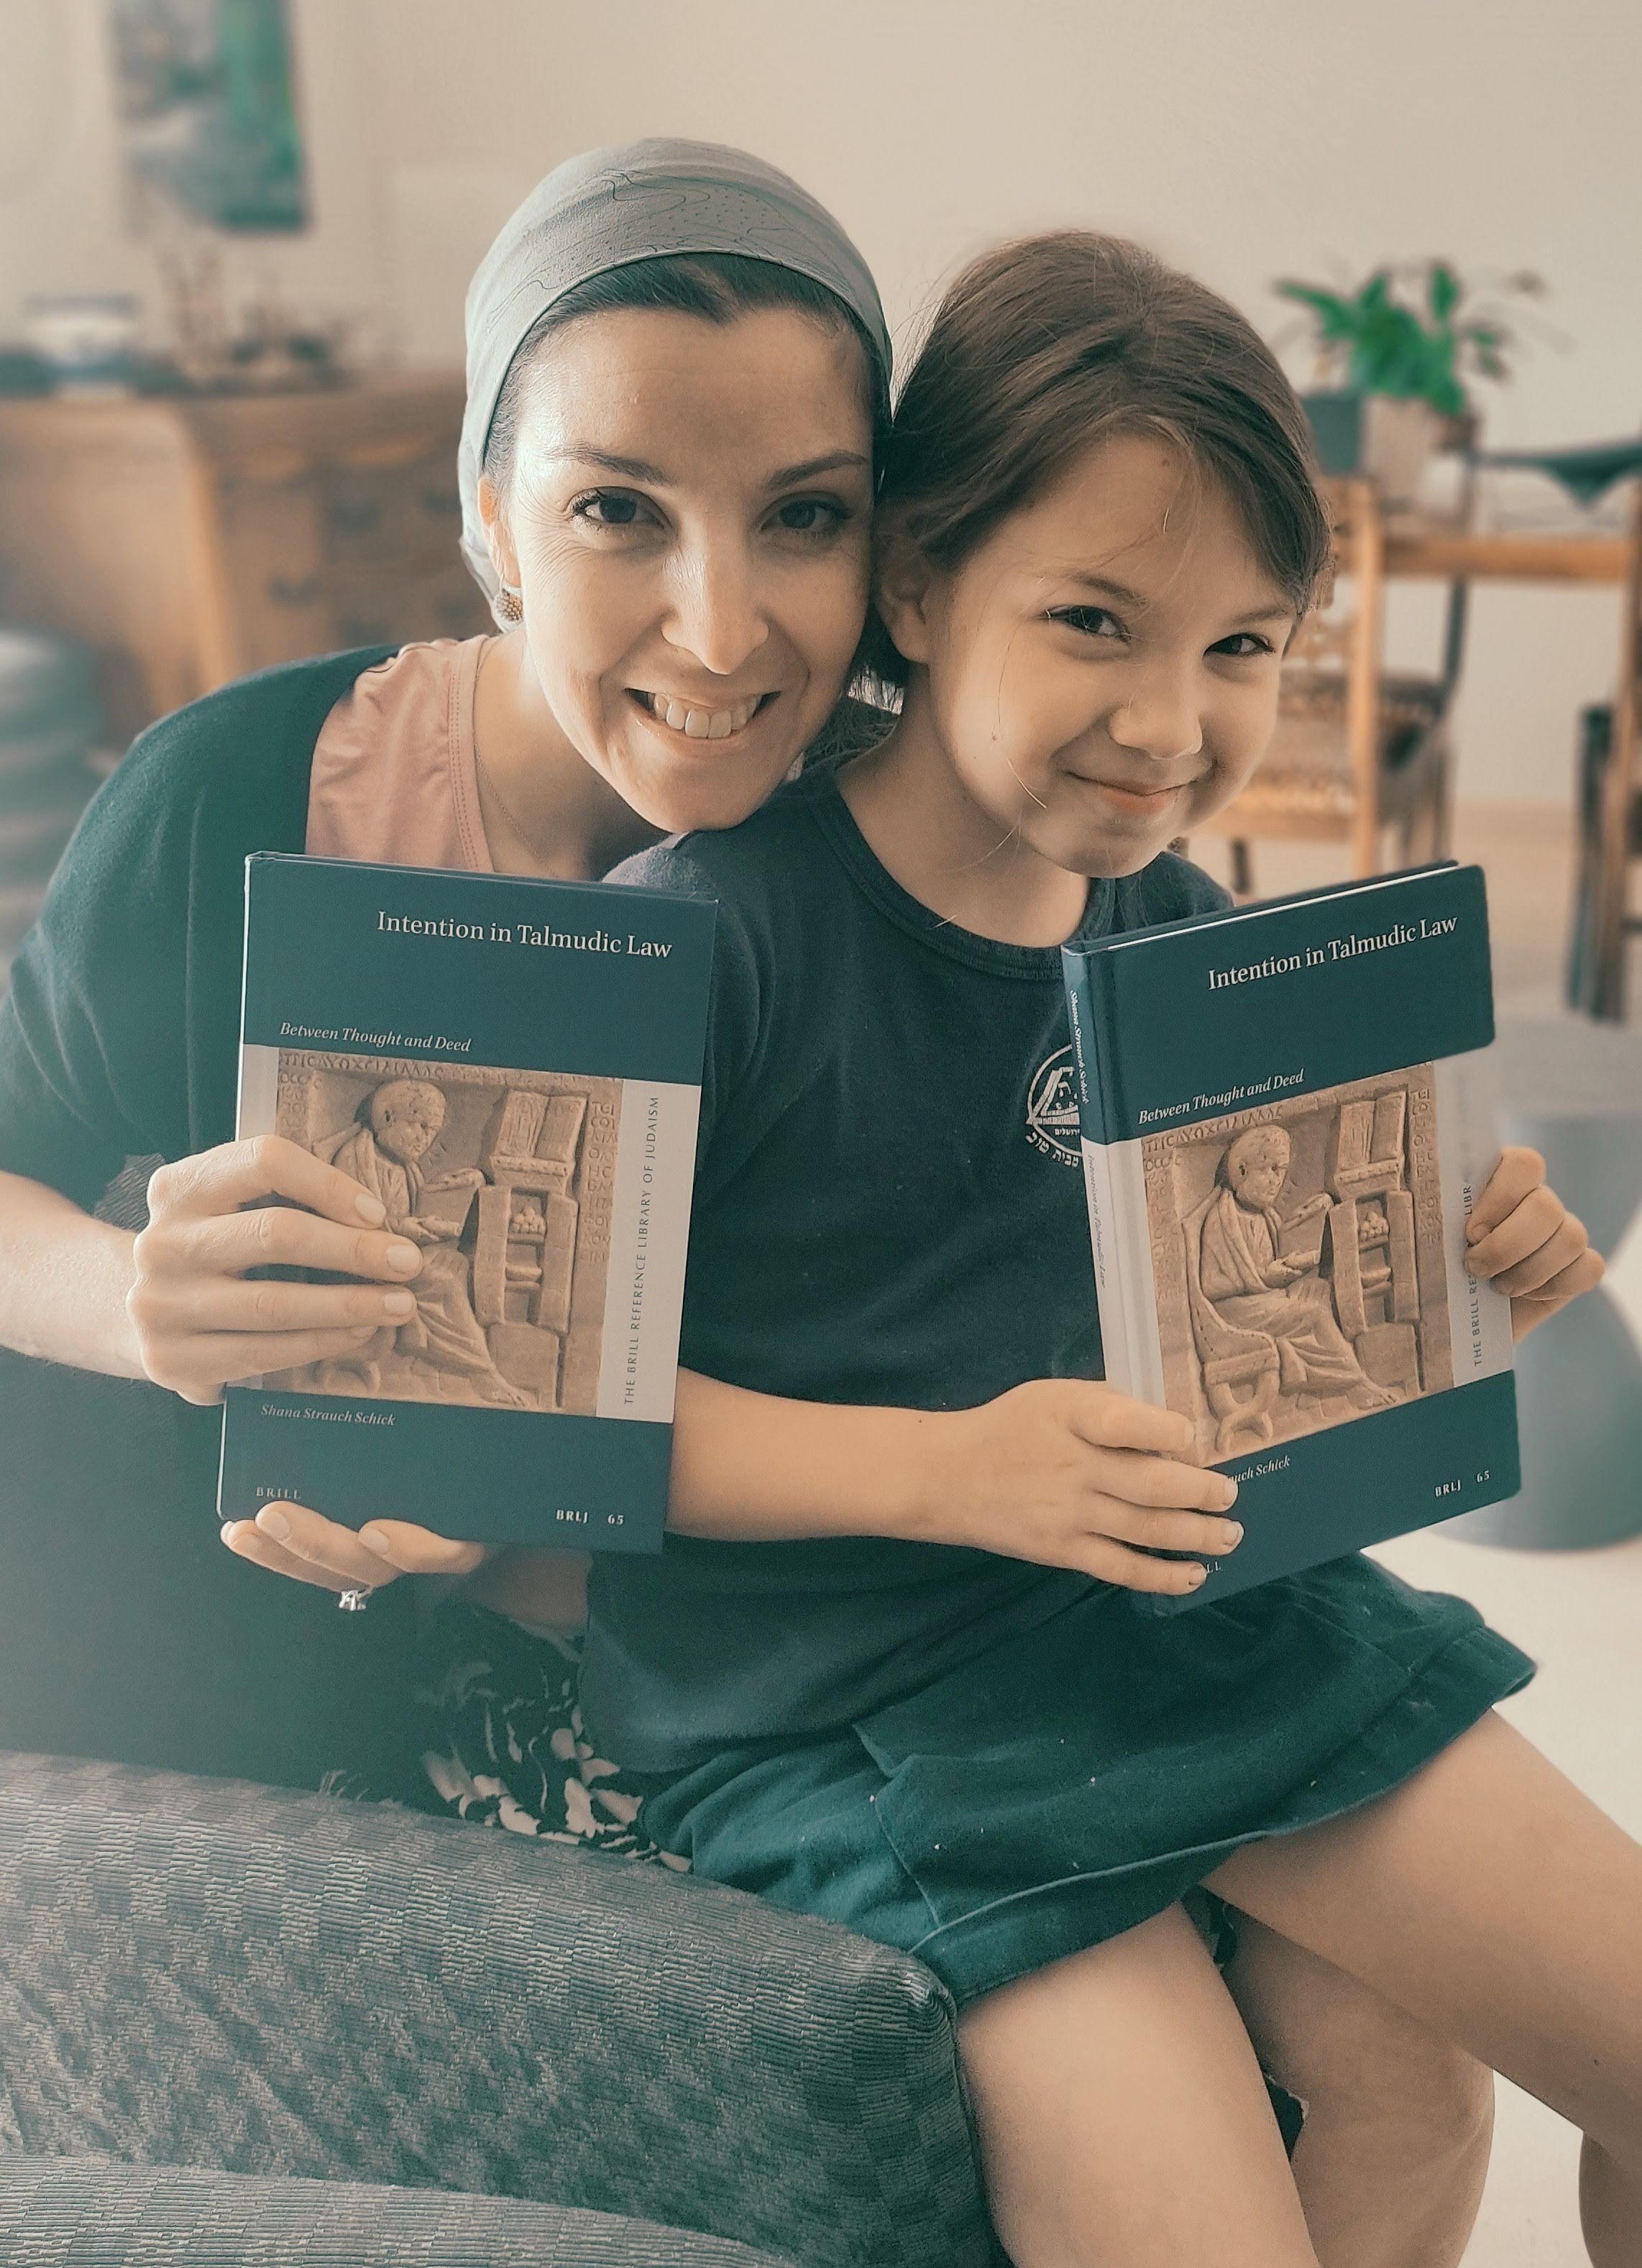 Brill Jewish Studies on Twitter: "* Author Copy * Author Shana Strauch  Schick and her daughter with the first copies of her new book "Intention in  #TalmudicLaw Between Thought and Deed", which